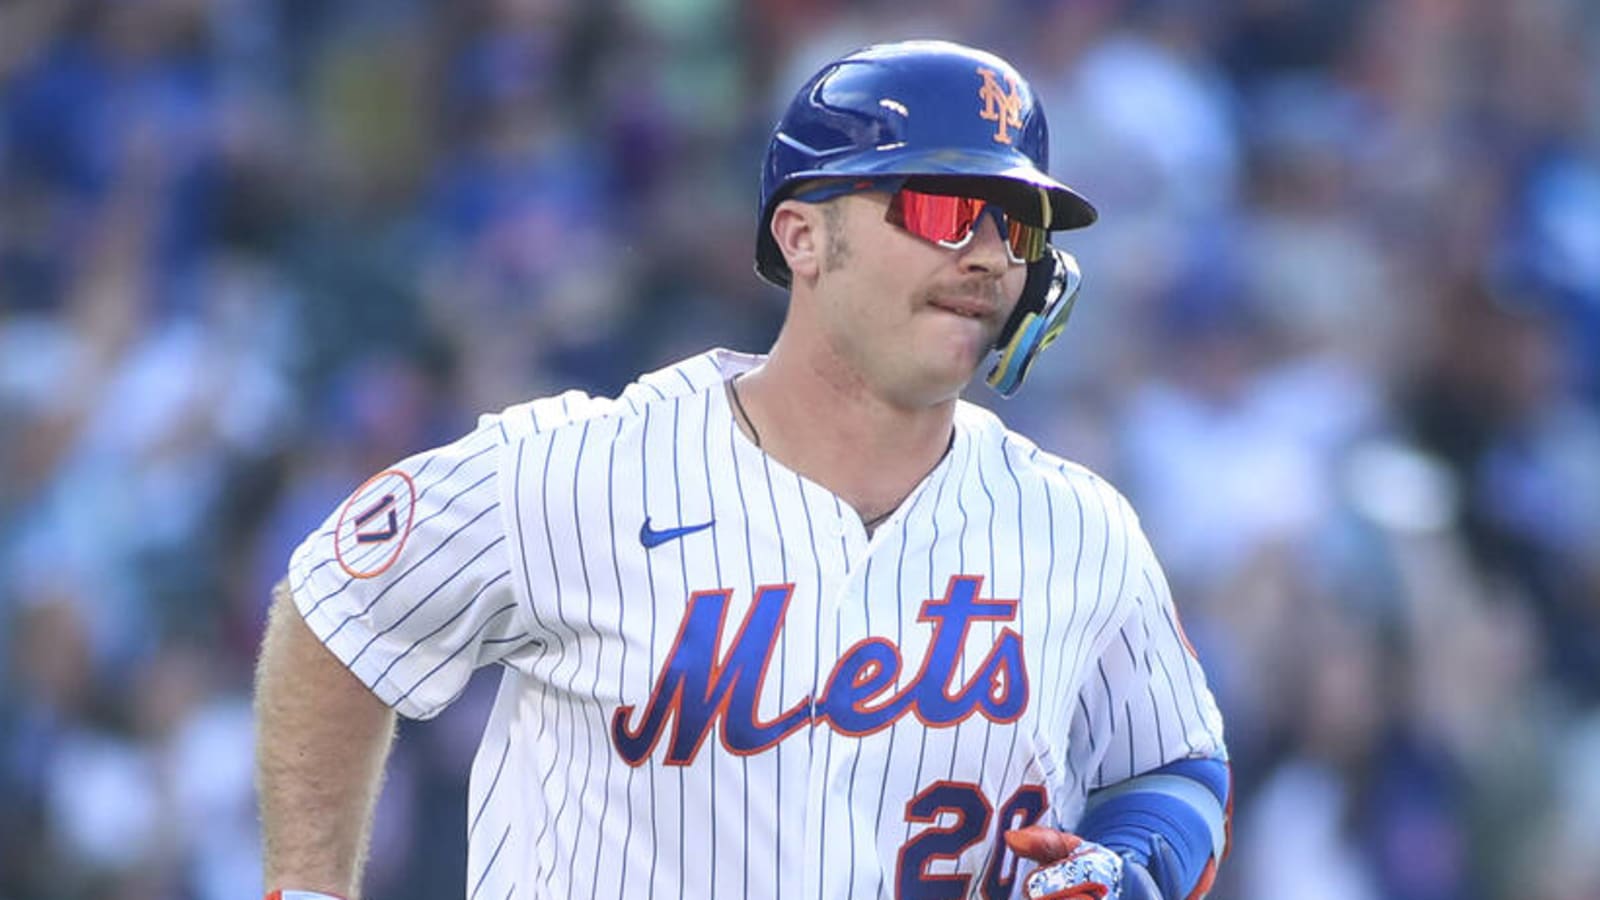 Pete Alonso will attempt to defend back-to-back Home Run Derby titles